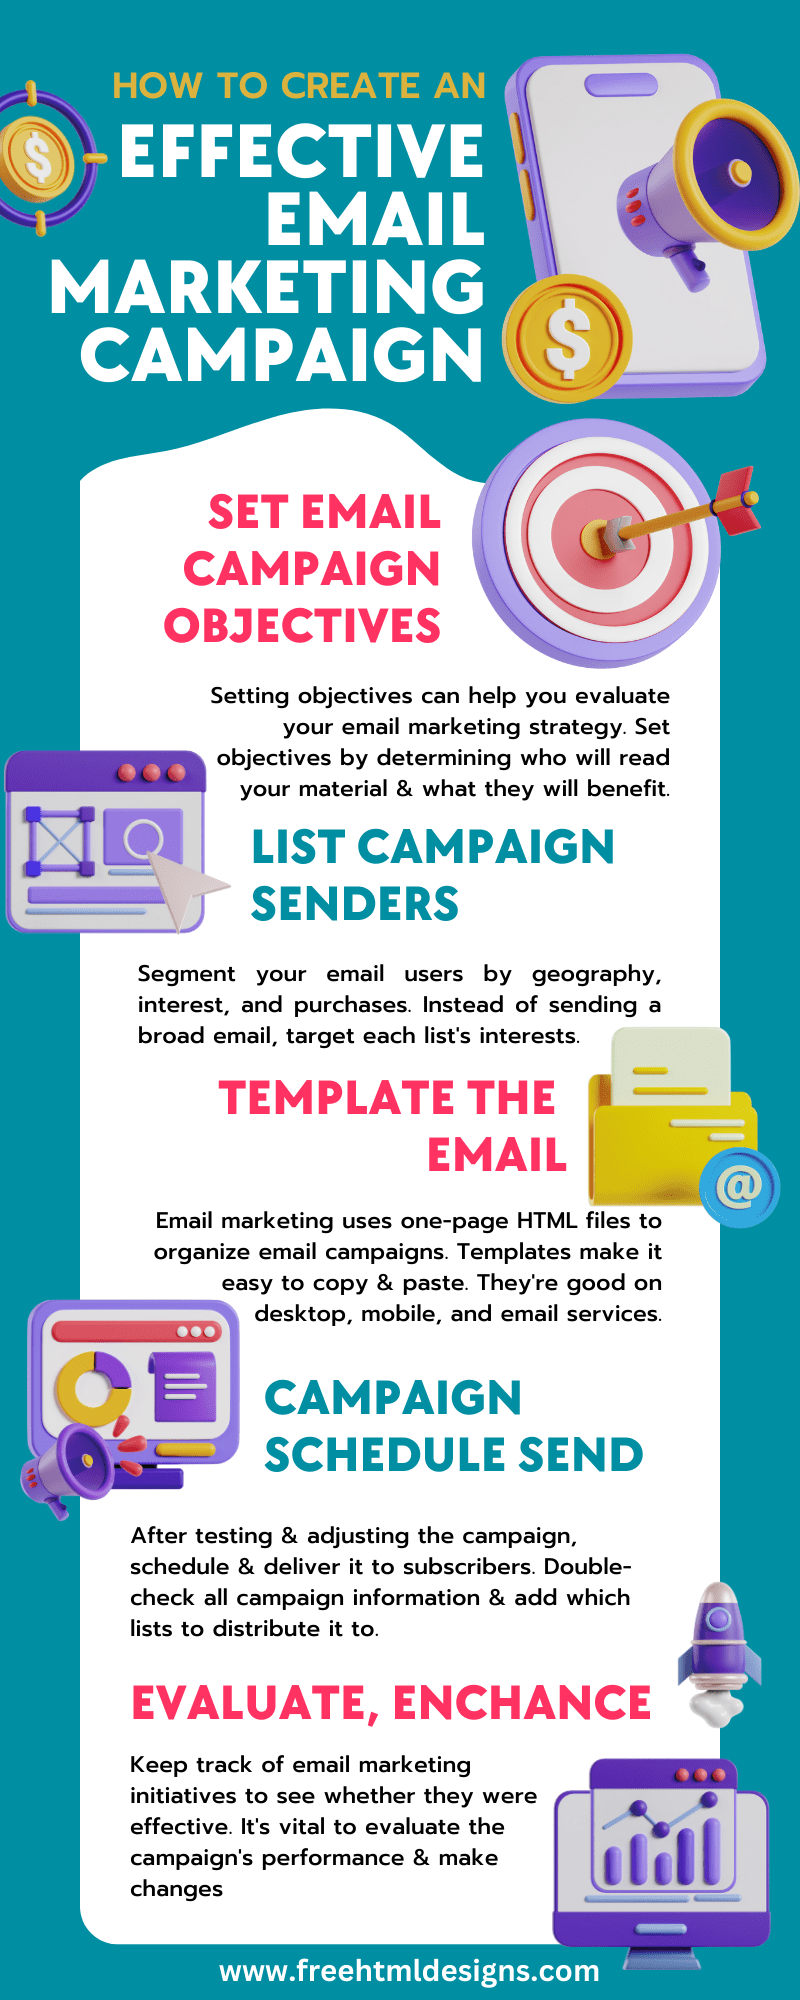 Email-Marketing-Campaign